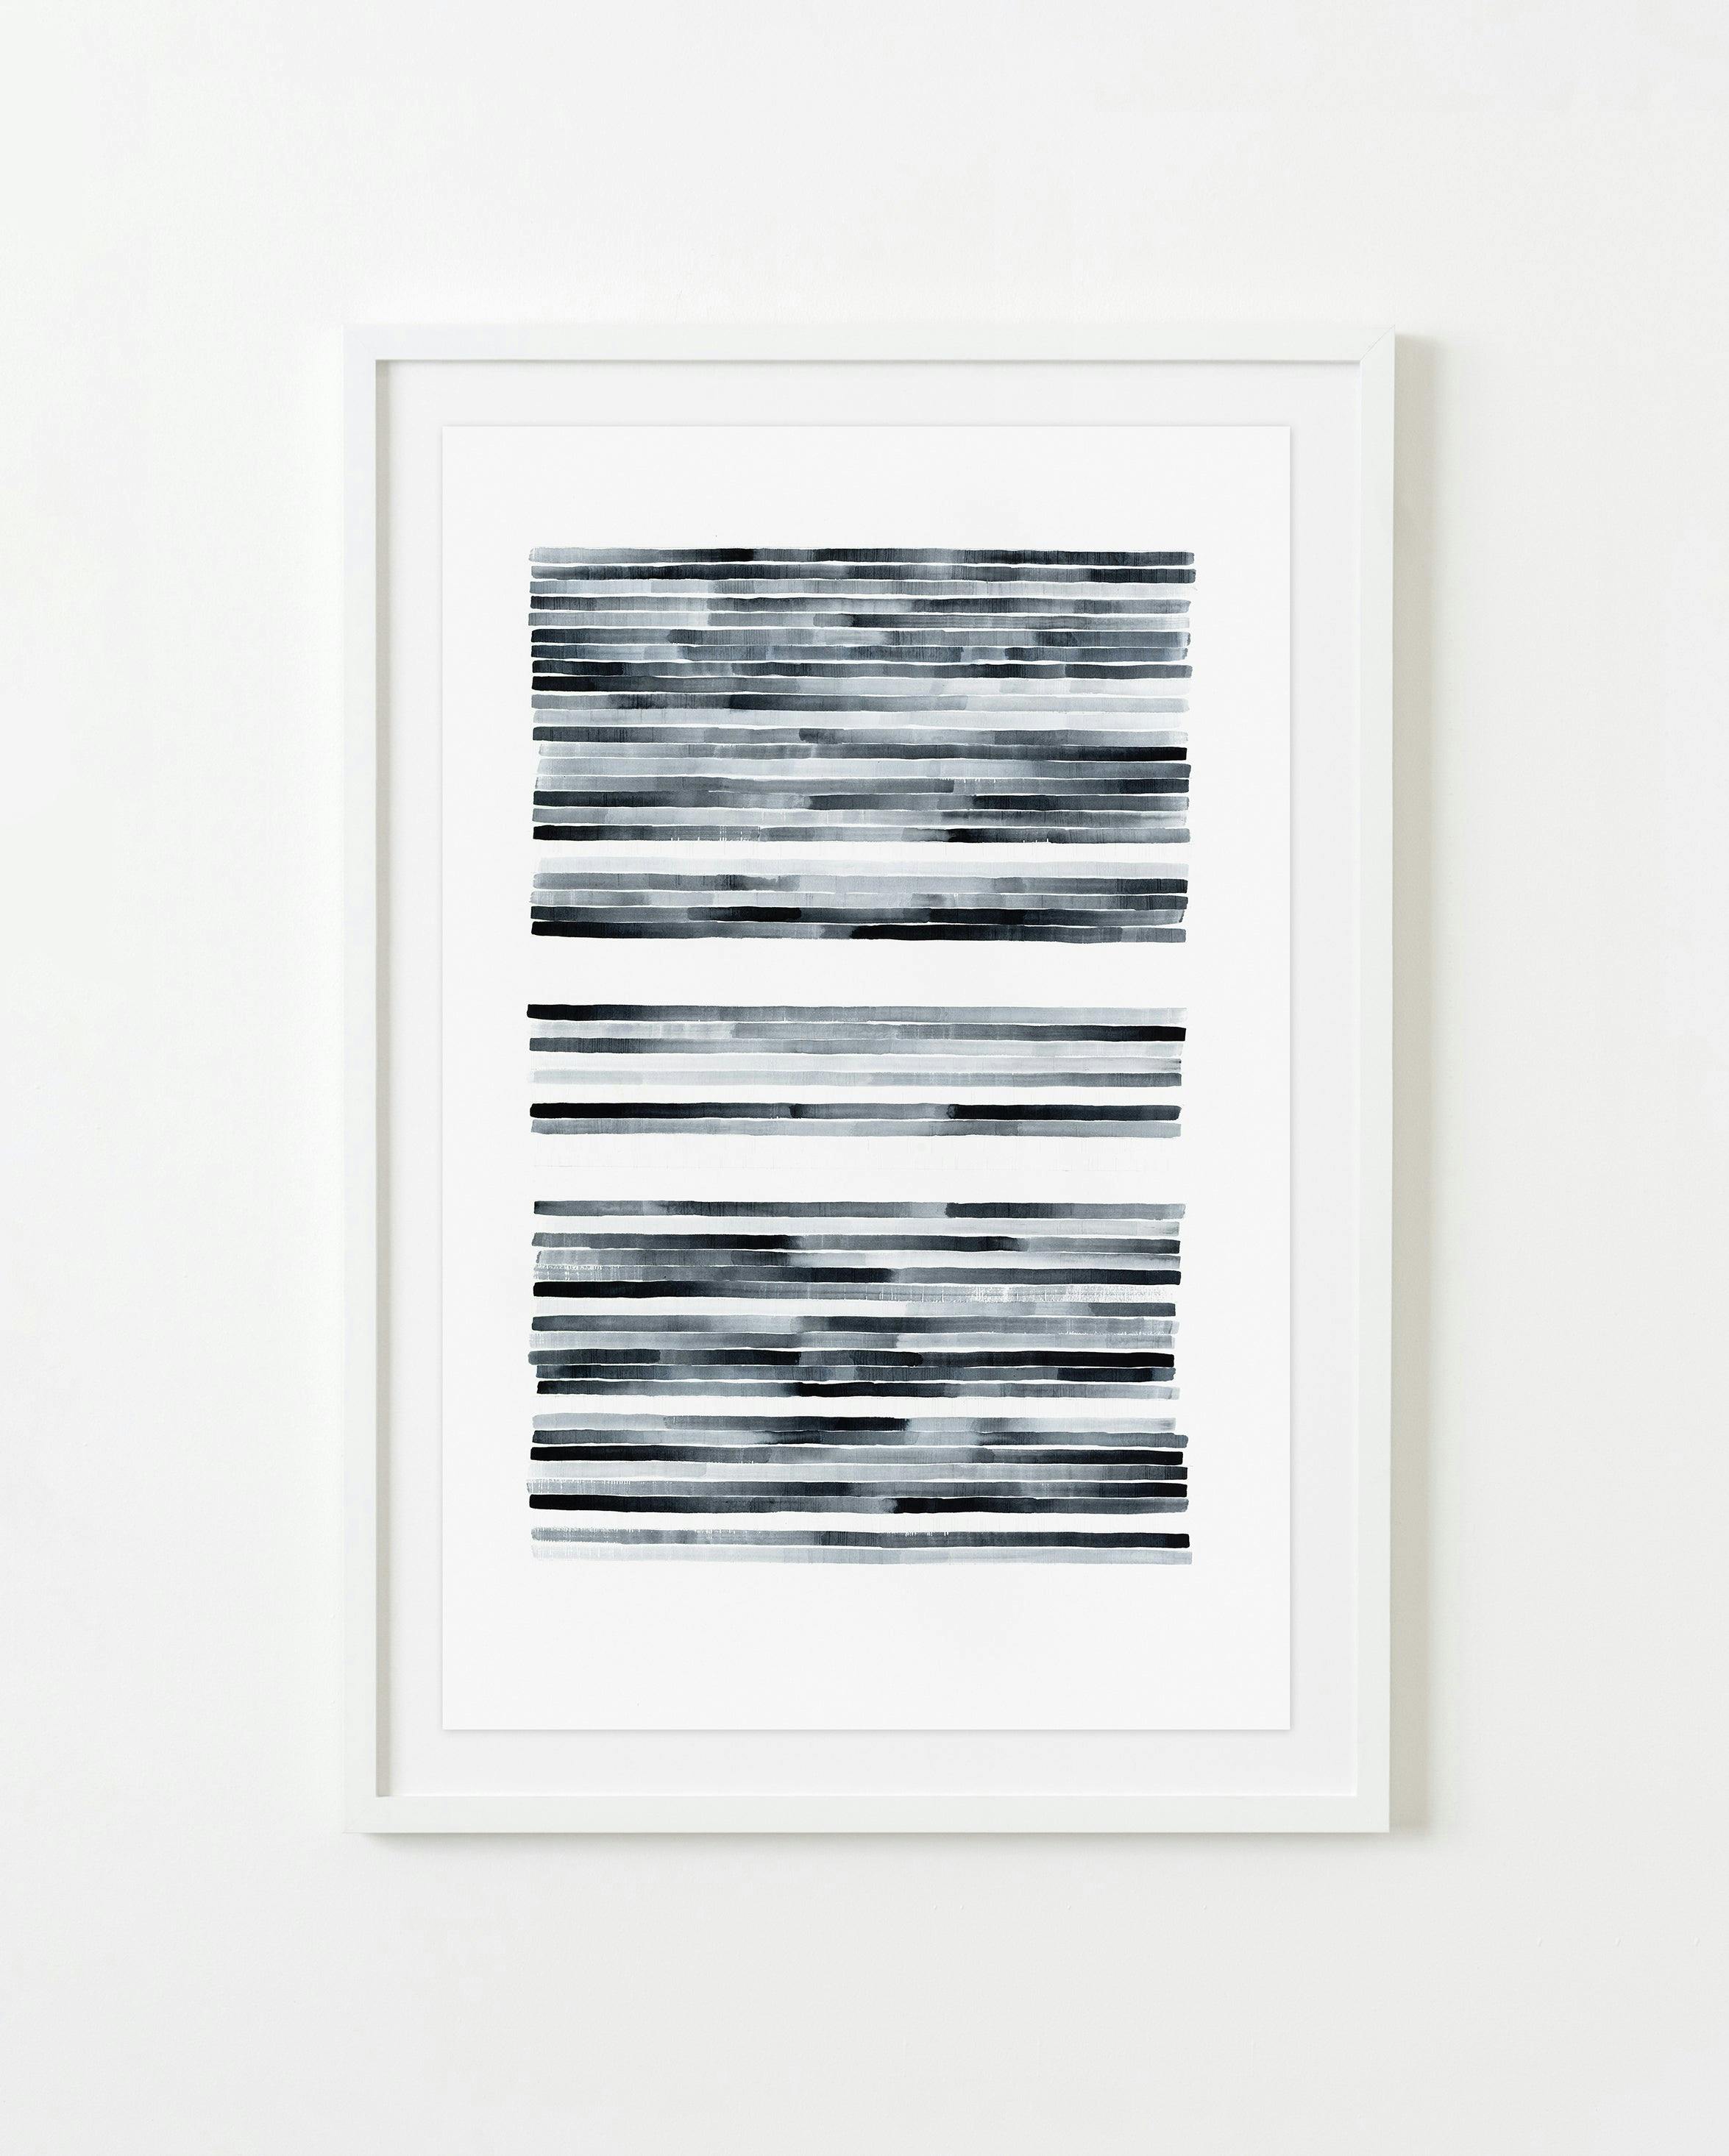 Painting by Gail Tarantino titled "Redaction Revisited - Version I".